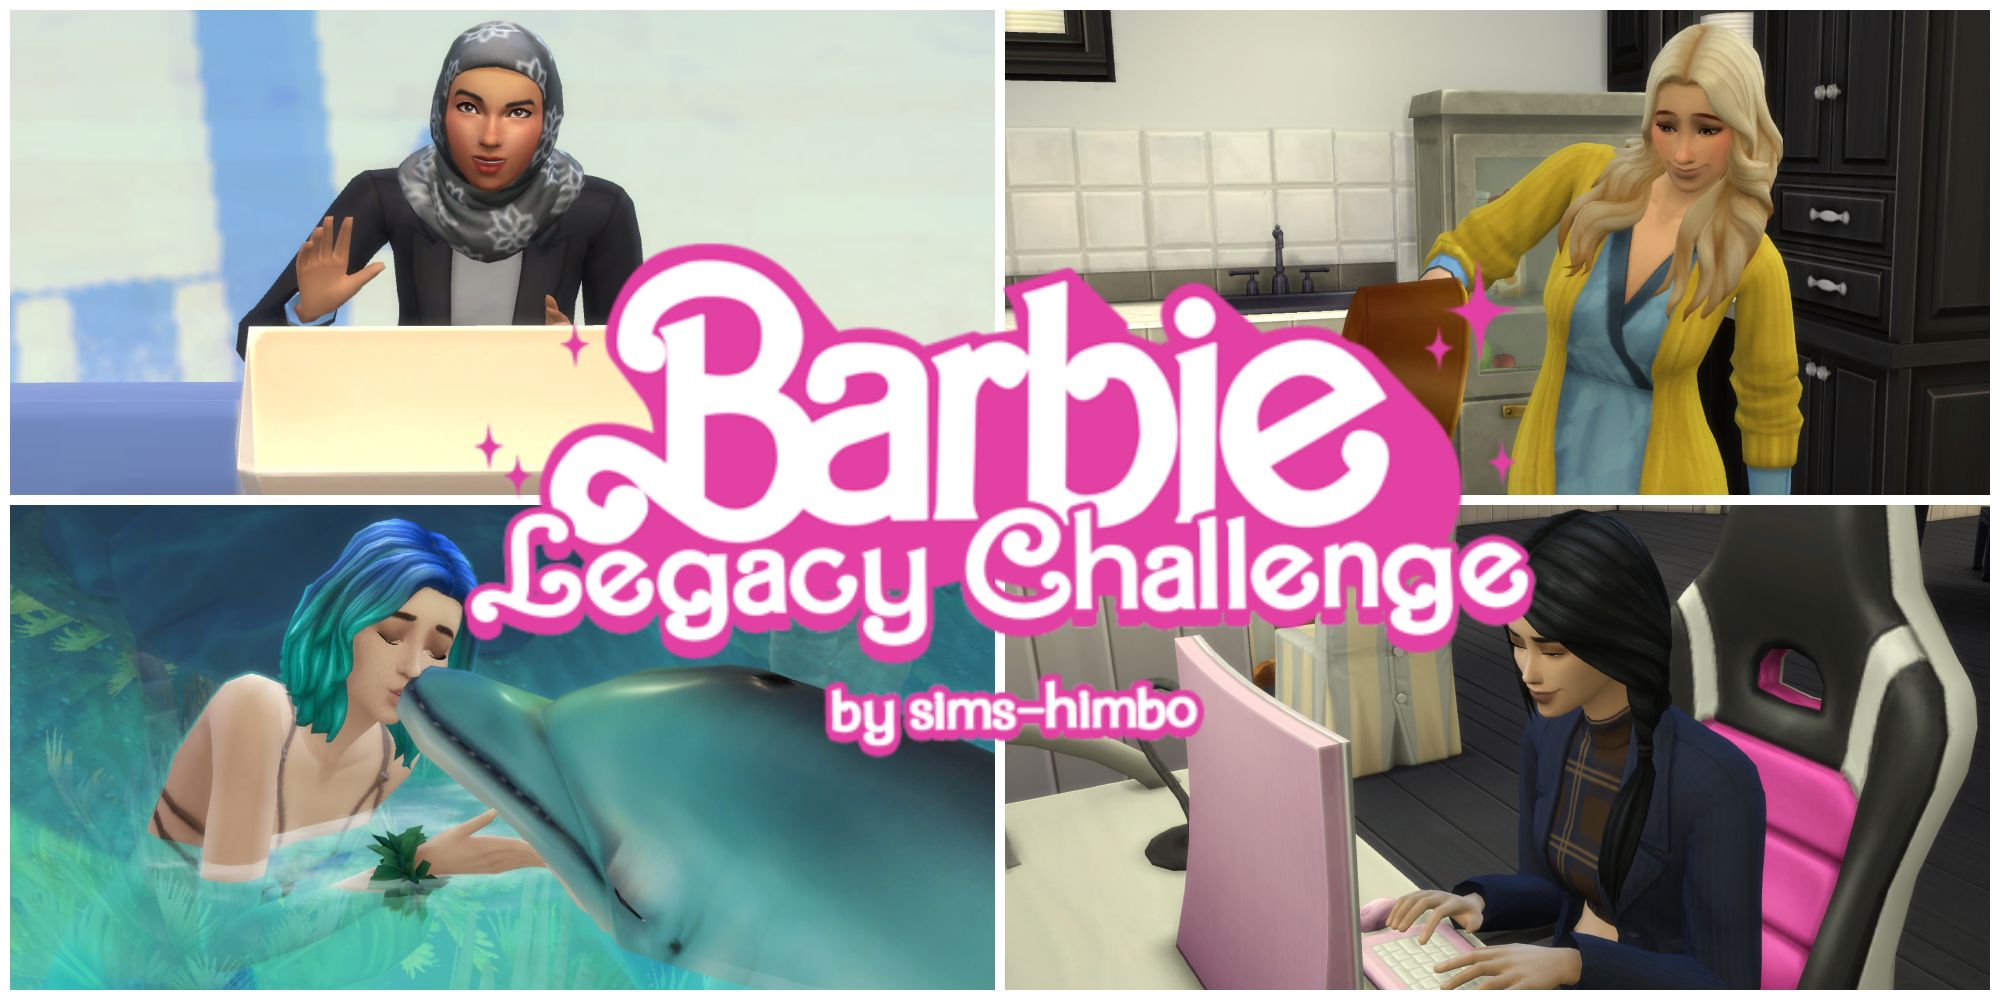 Several powerful female Sims at work as part of the Barbie Legacy Challenge (The Sims 4)